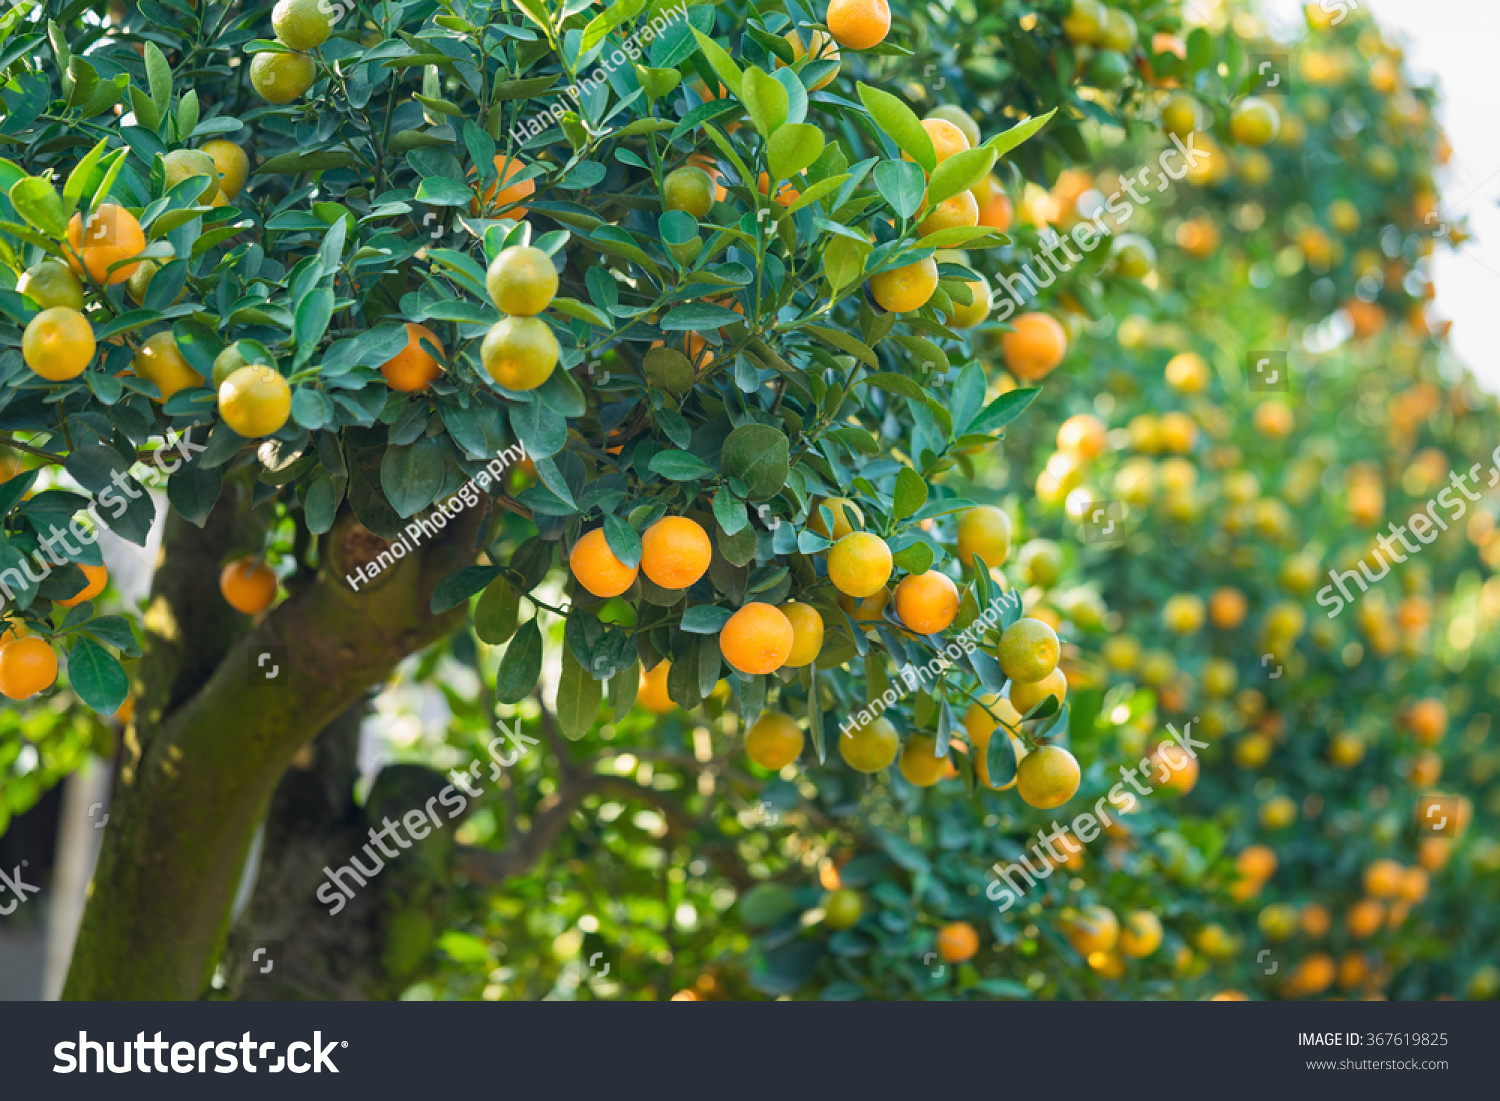 Kumquat tree under water sprays, the symbol of Vietnamese lunar new year. In nearly every household, crucial purchases for Tet include the peach "hoa dao" and kumquat plant #367619825